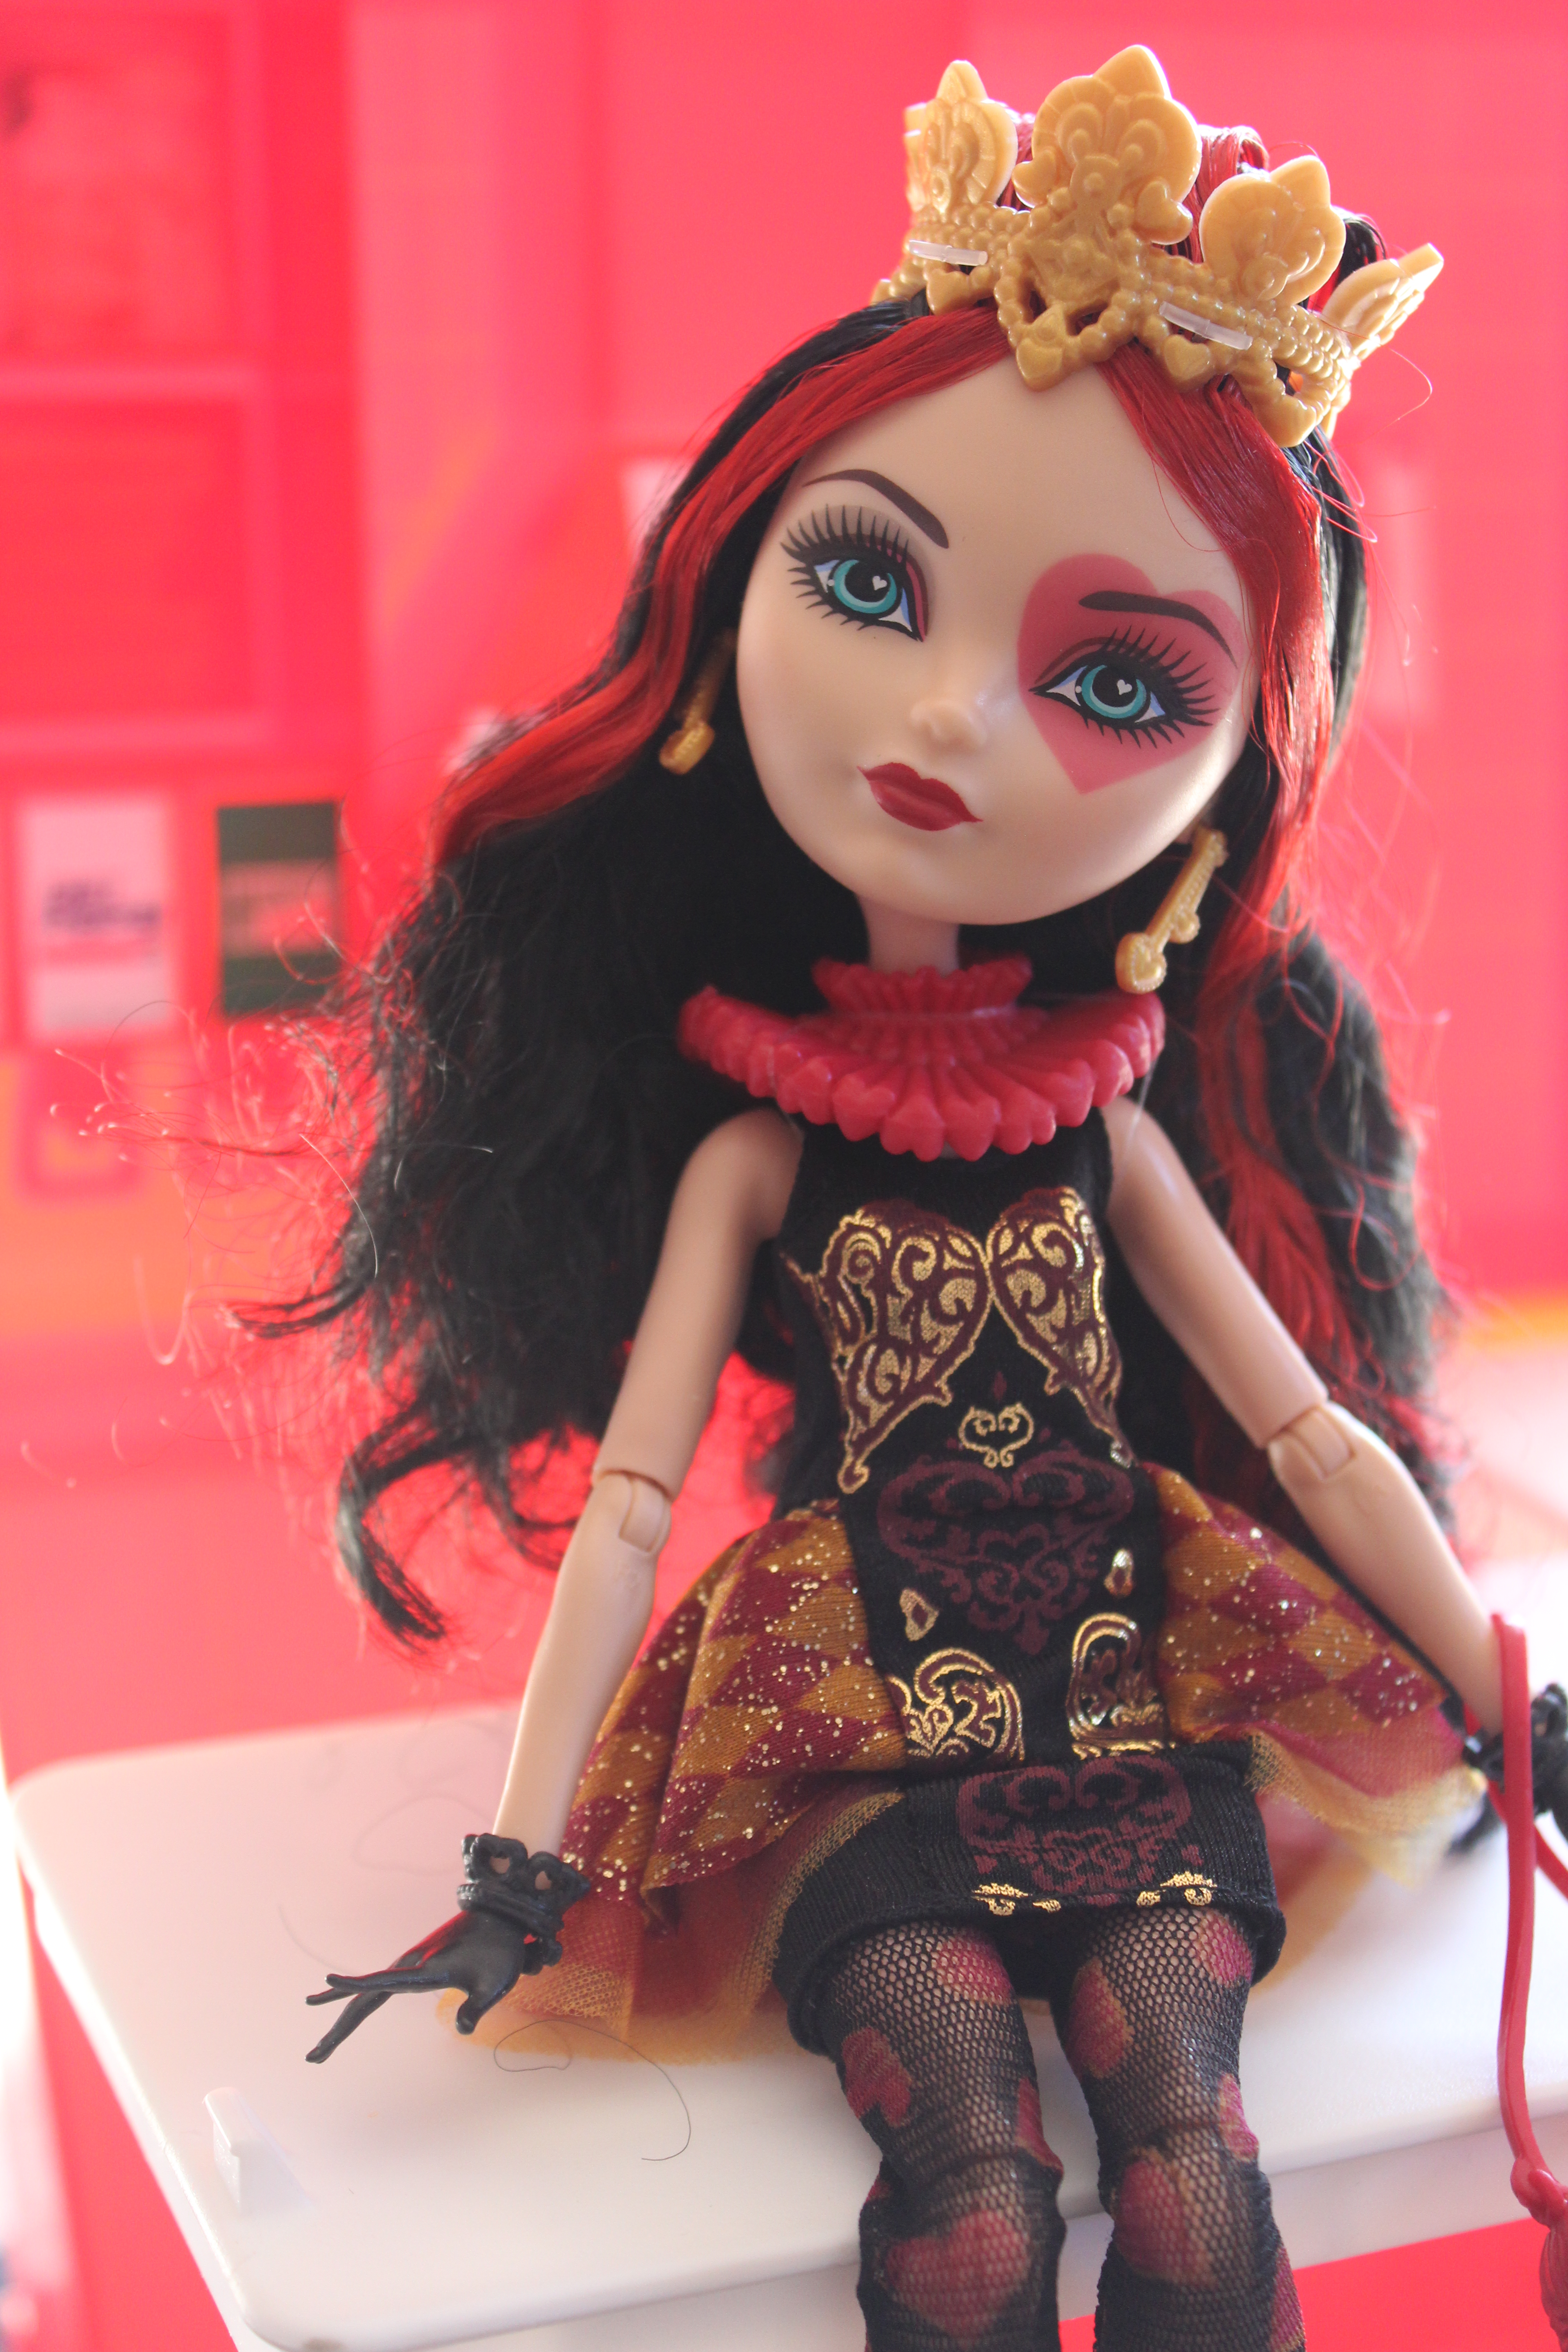 Doll Review: Spring Unsprung Lizzie Hearts — Pixie Dust Dolls